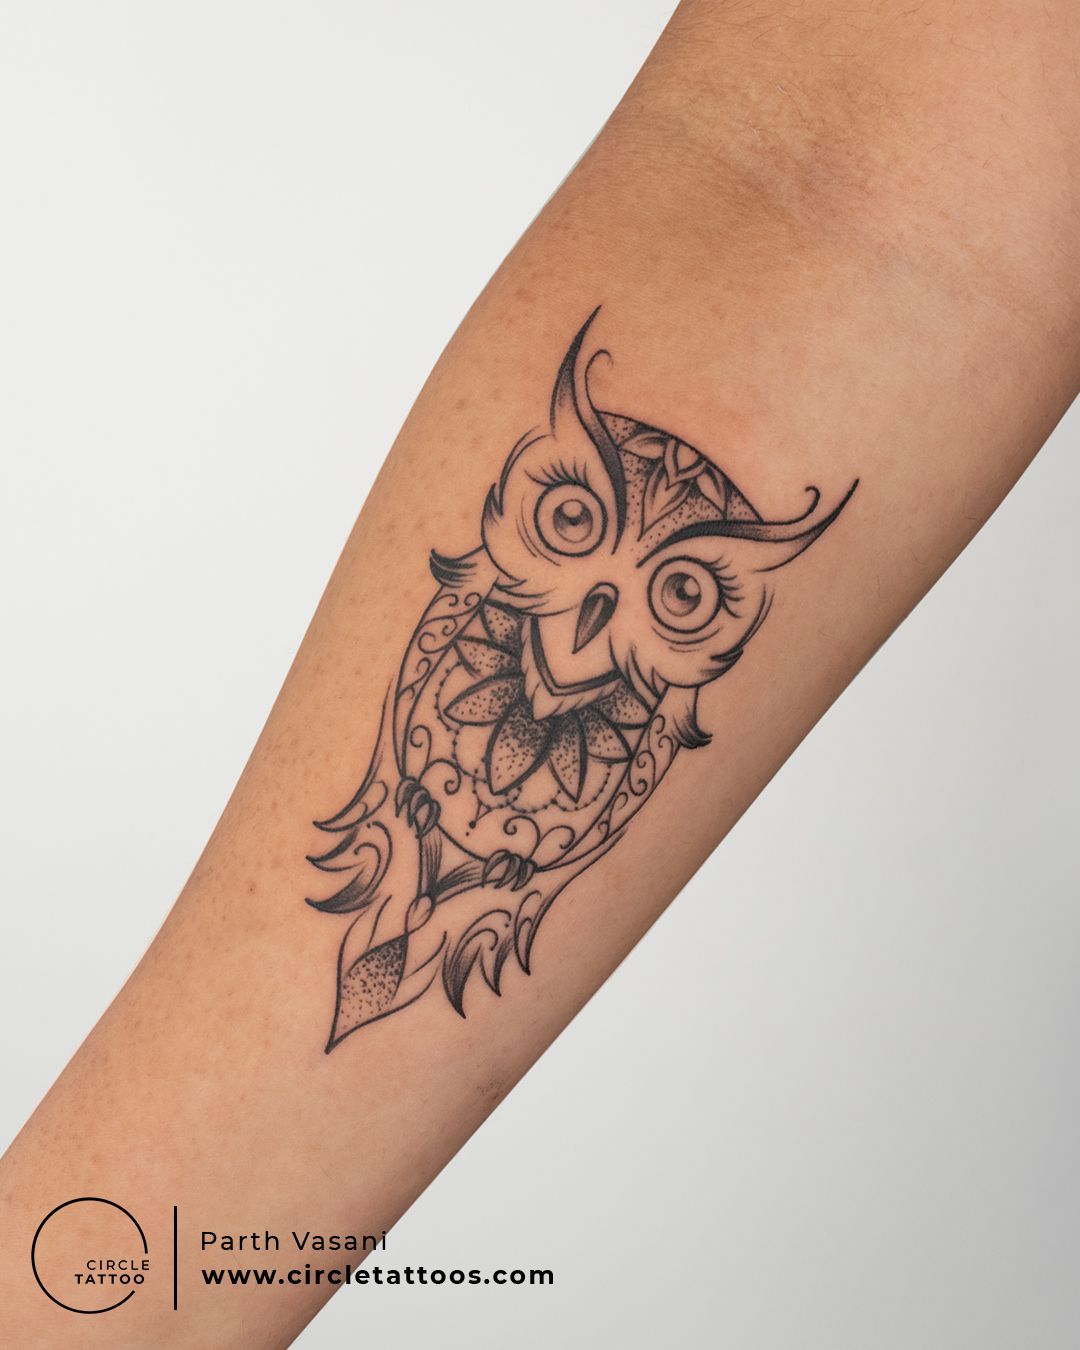 95 Best Photos of Owl Tattoos  Signs of Wisdom 2019